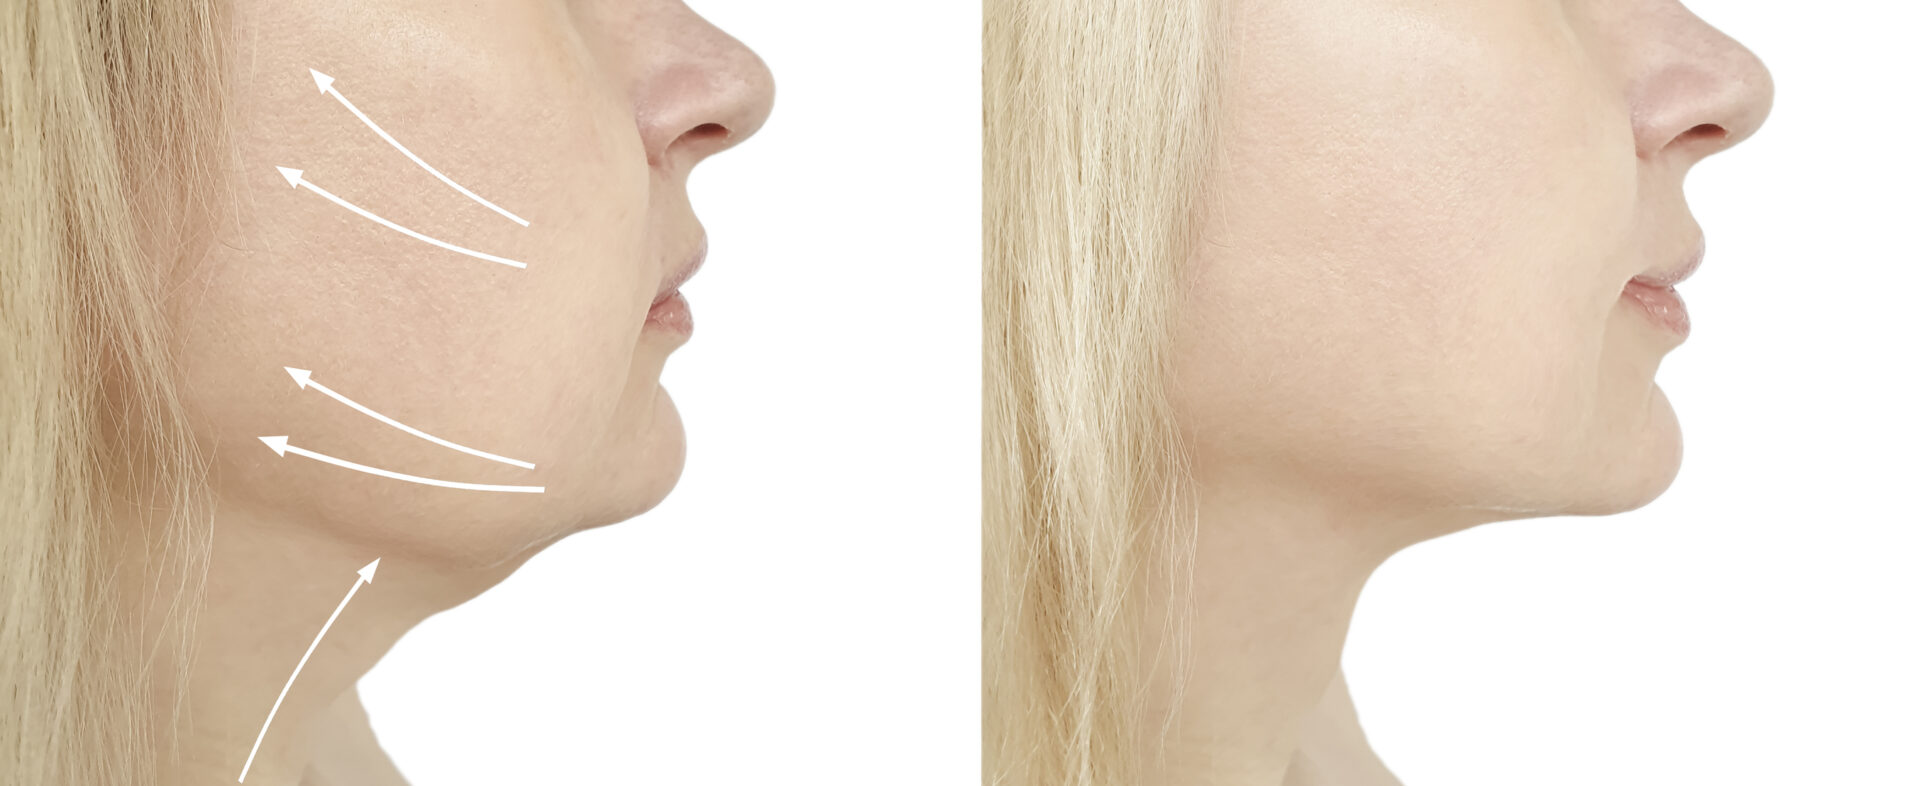 woman chin before and after procedure, retouching